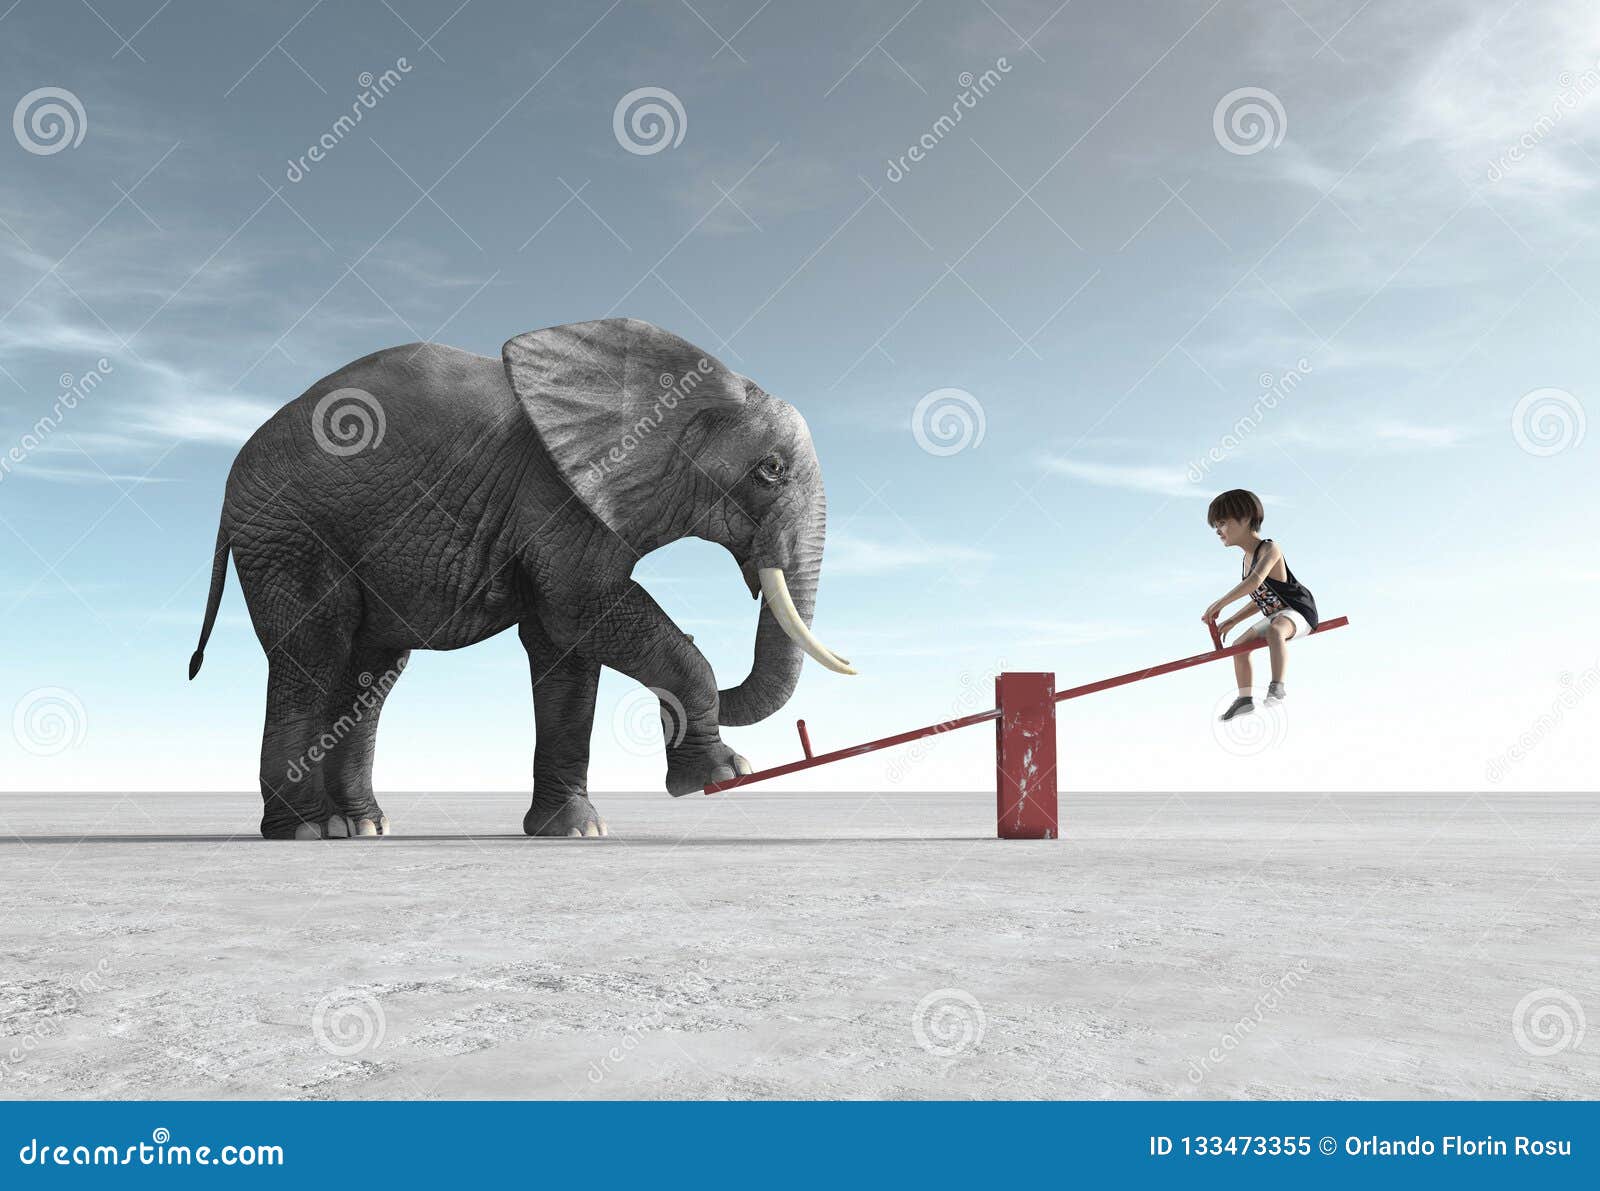 a child is in a rocking chair with an elephant